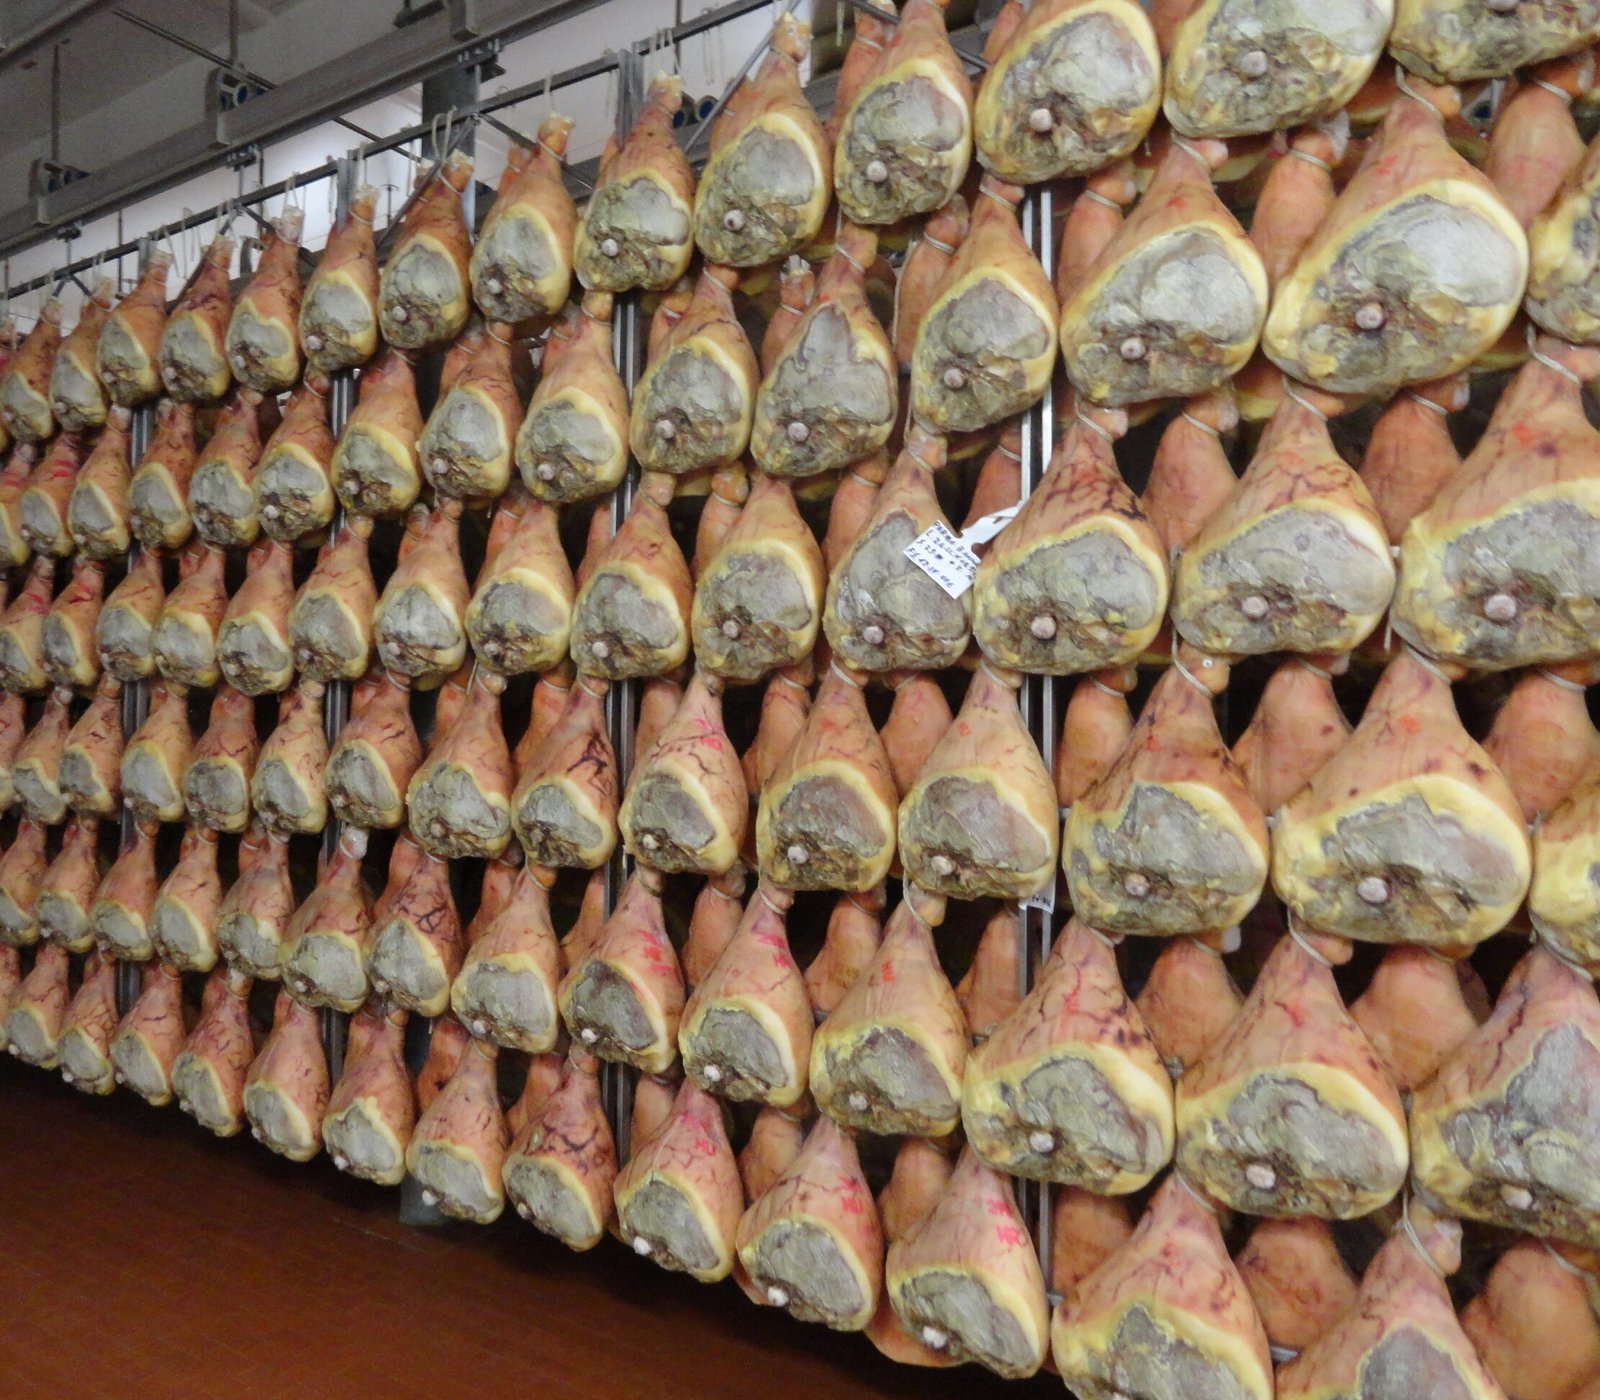 Parma ham tour, Parma, Italy. Let us be your travel guide to the different regions in Italy - ouritalianjourney.com